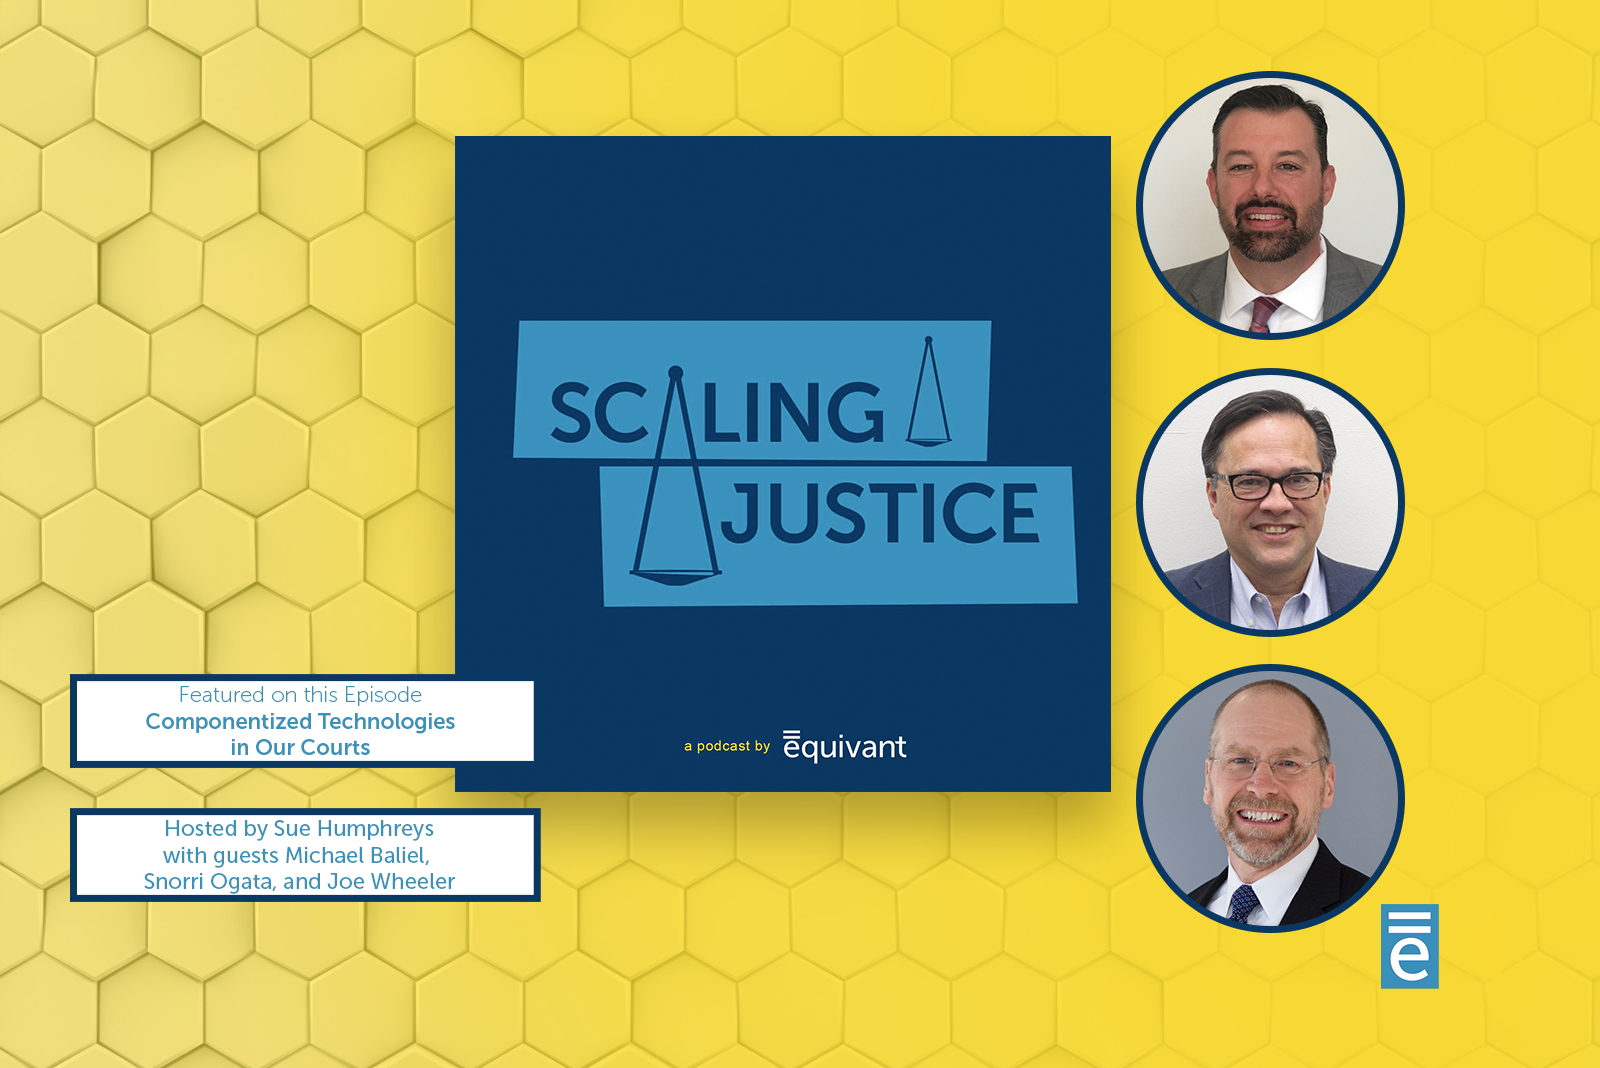 Scaling Justice: Componentized Technologies in our Courts